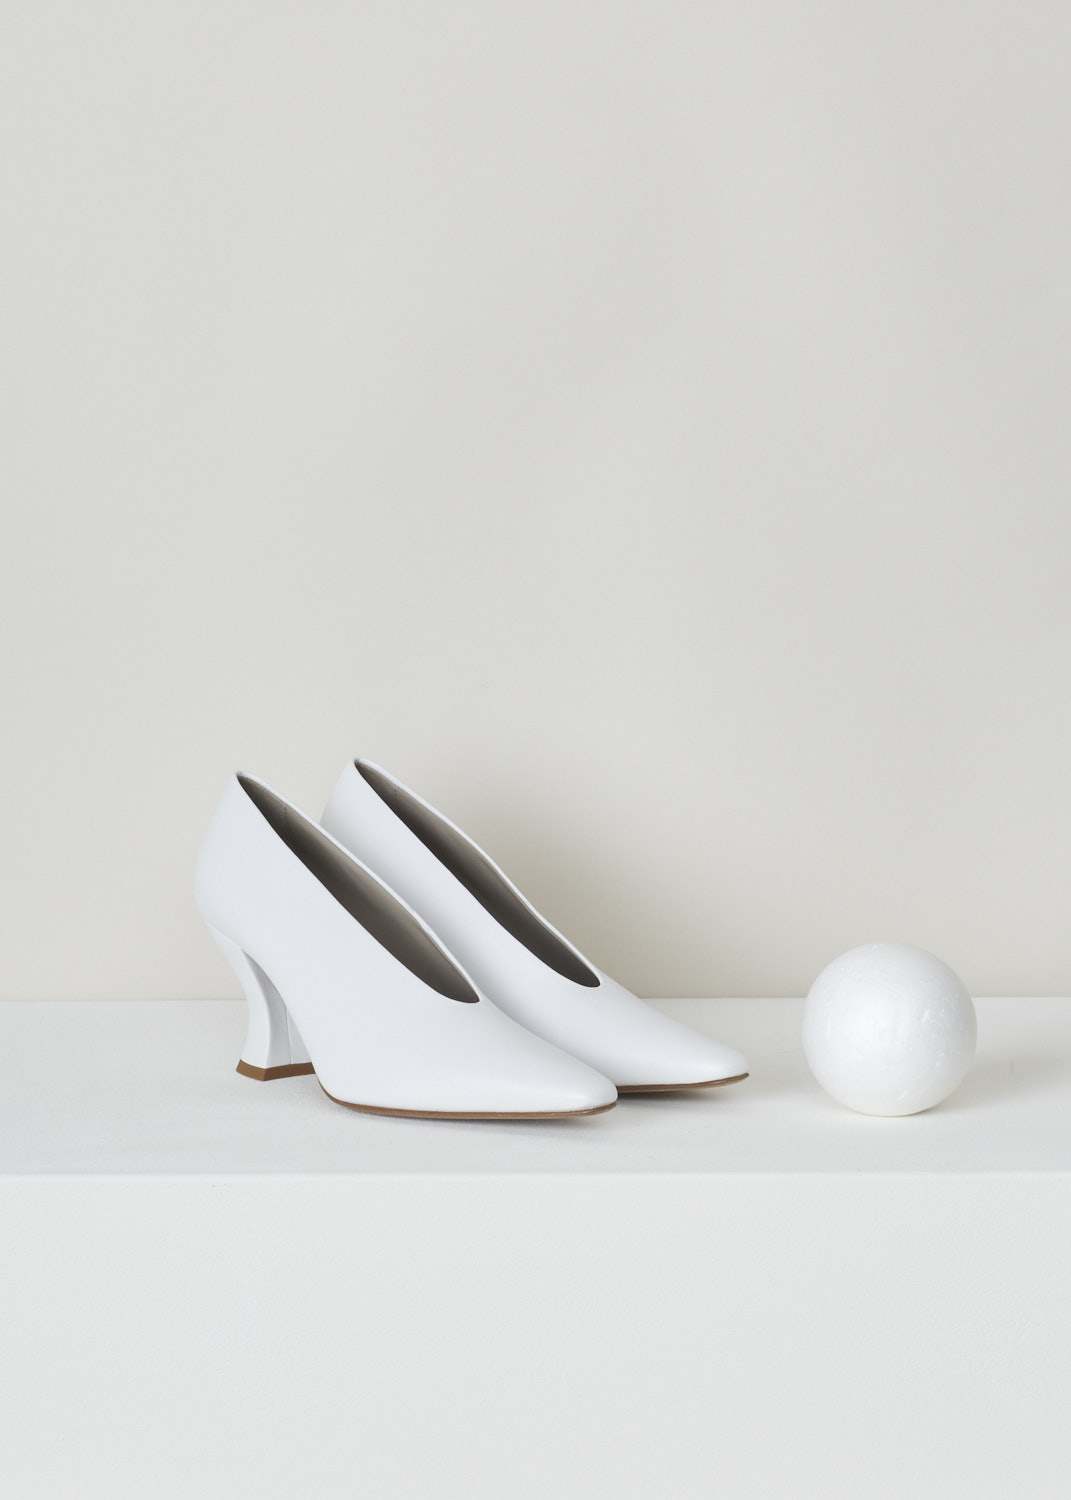 Bottega Veneta, White  chalky pumps, 608839_VBSD0_9122_optic_white, white, front,  Made from smooth white chalky colored leather, featuring a spool heel, an elongated toes and a high vamp.

Heel height: 7 cm / 2.7 inch.